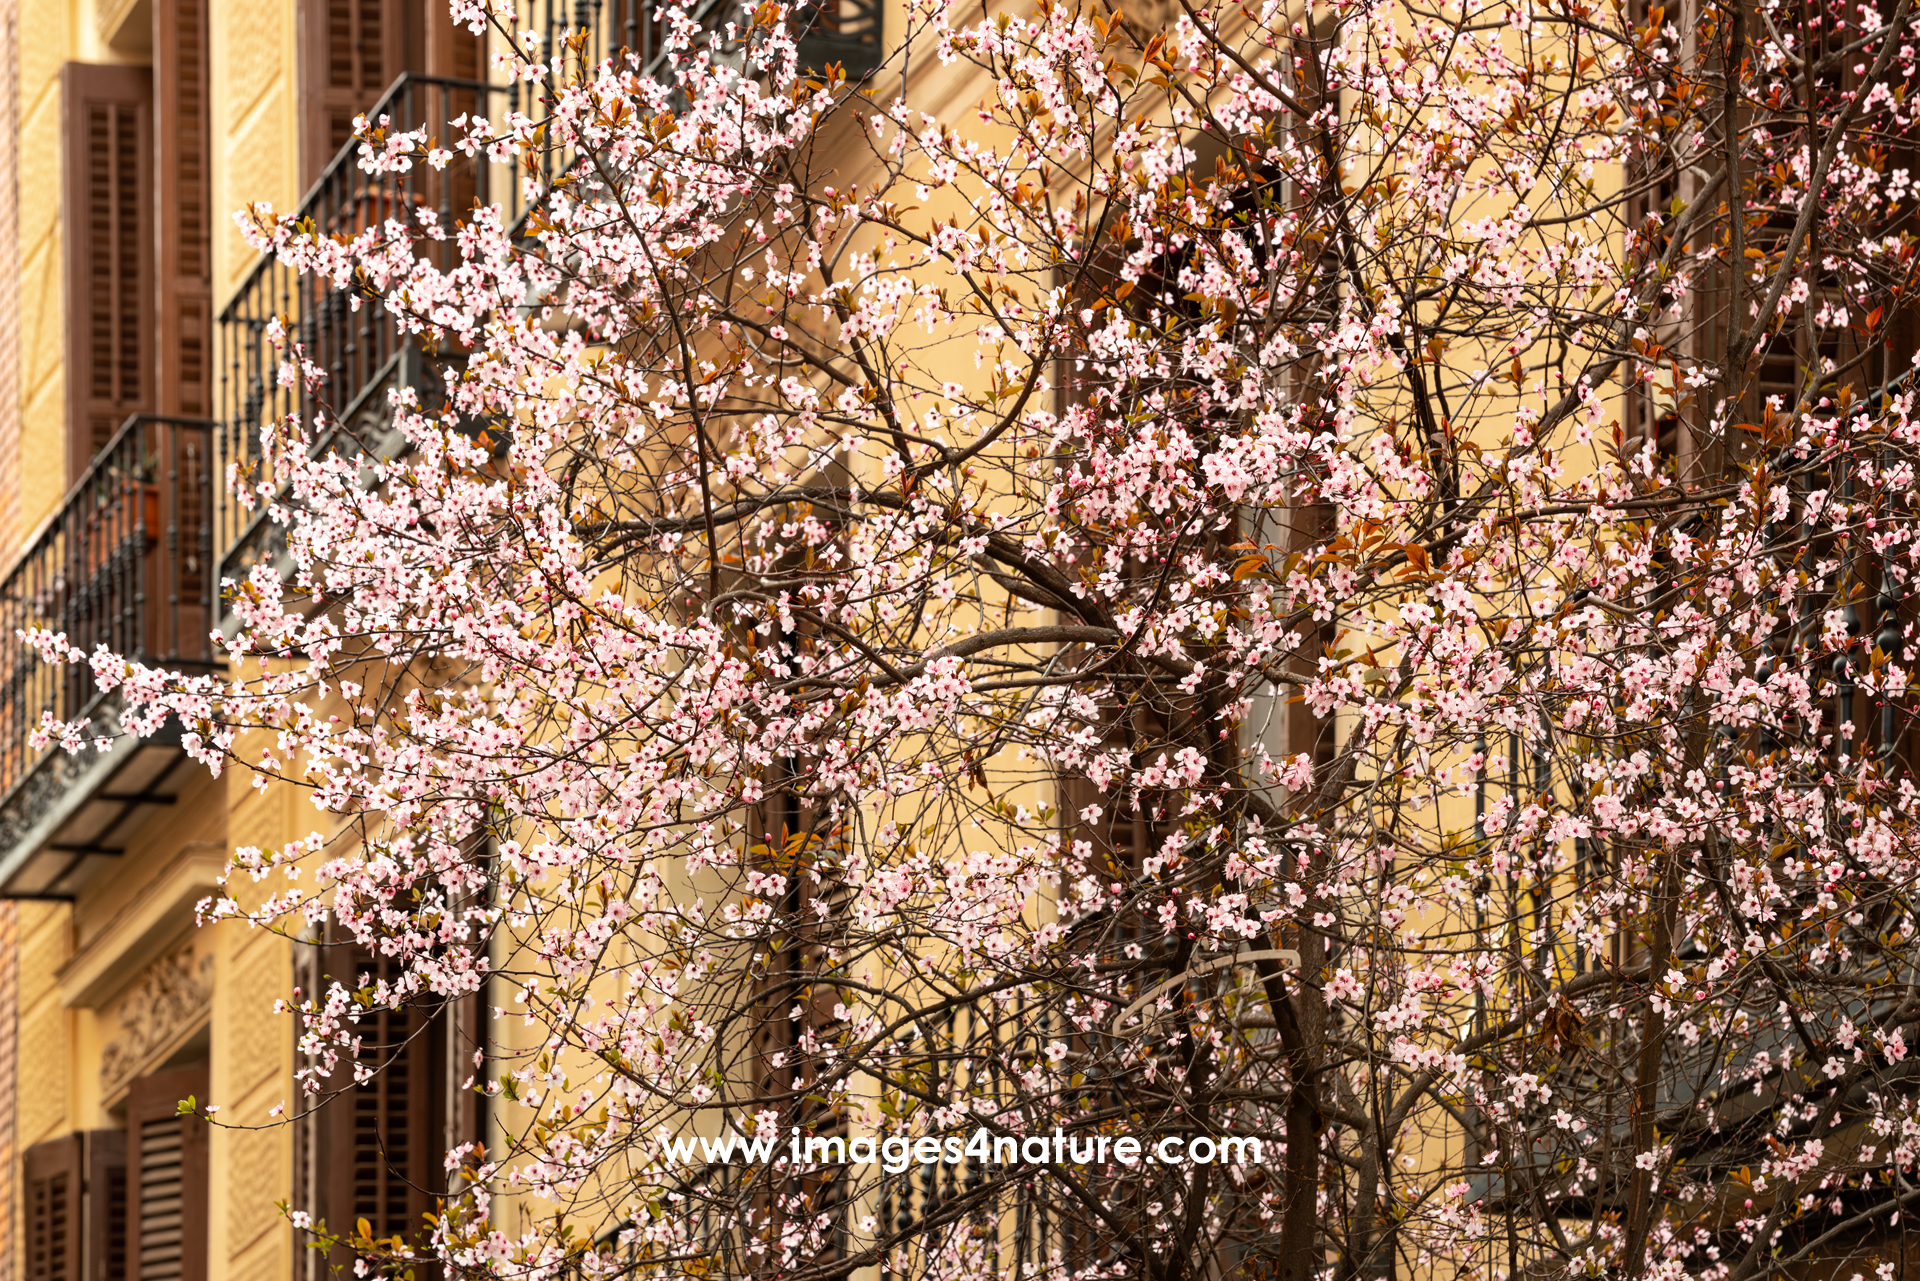 Tree blooming with pink flowers in old town Madrid alley